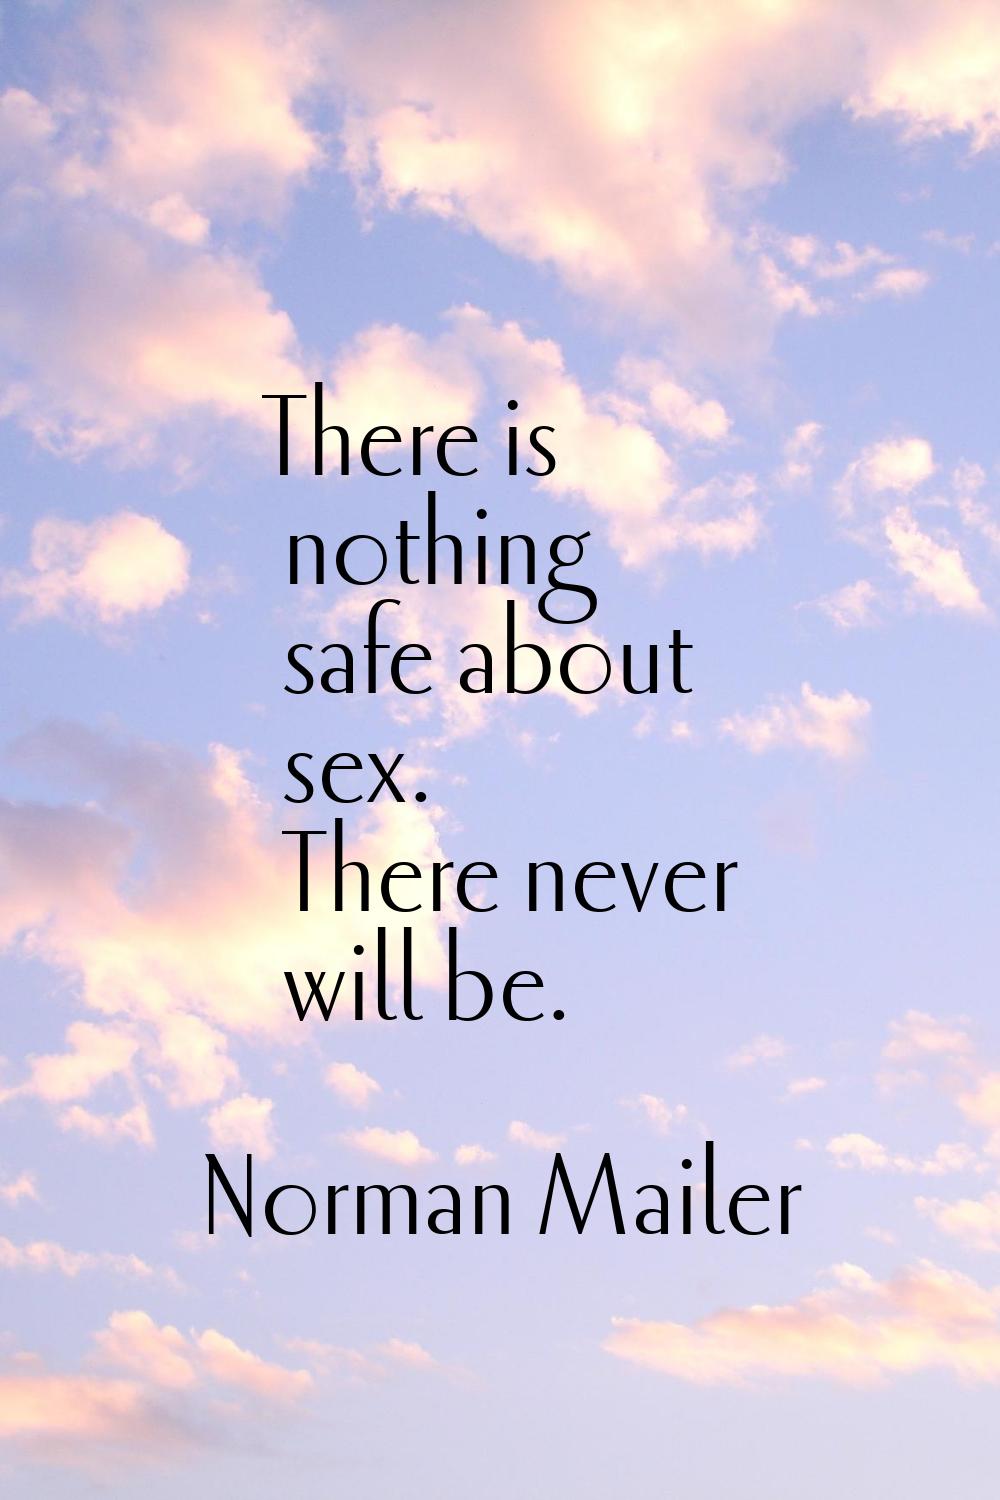 There is nothing safe about sex. There never will be.